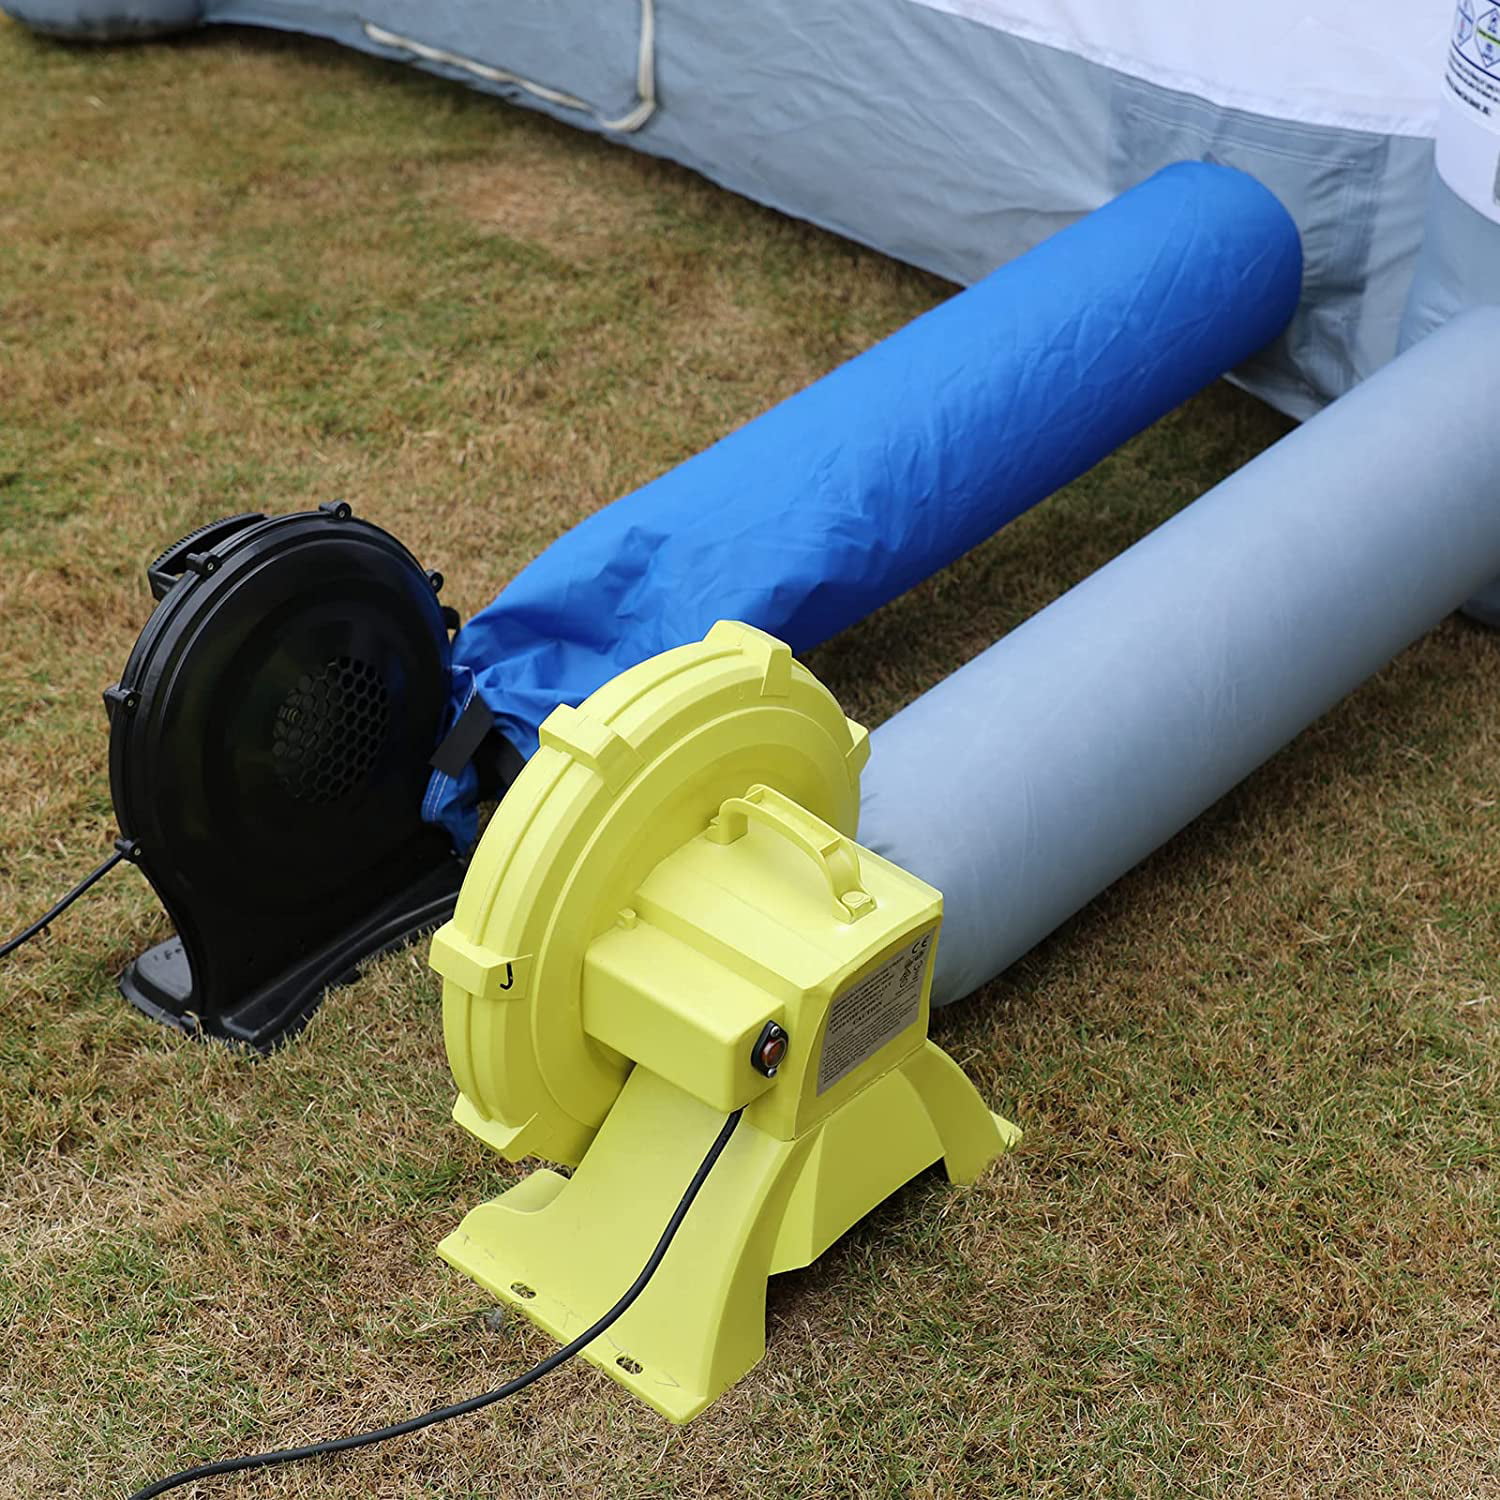 GORILLASPRO Inflatable Panit Booth 30x16x11Ft with 2 Powerful Blowers (750W+1100W), Perfect for Vehicle Painting, More Durable Inflatable Paint Tent